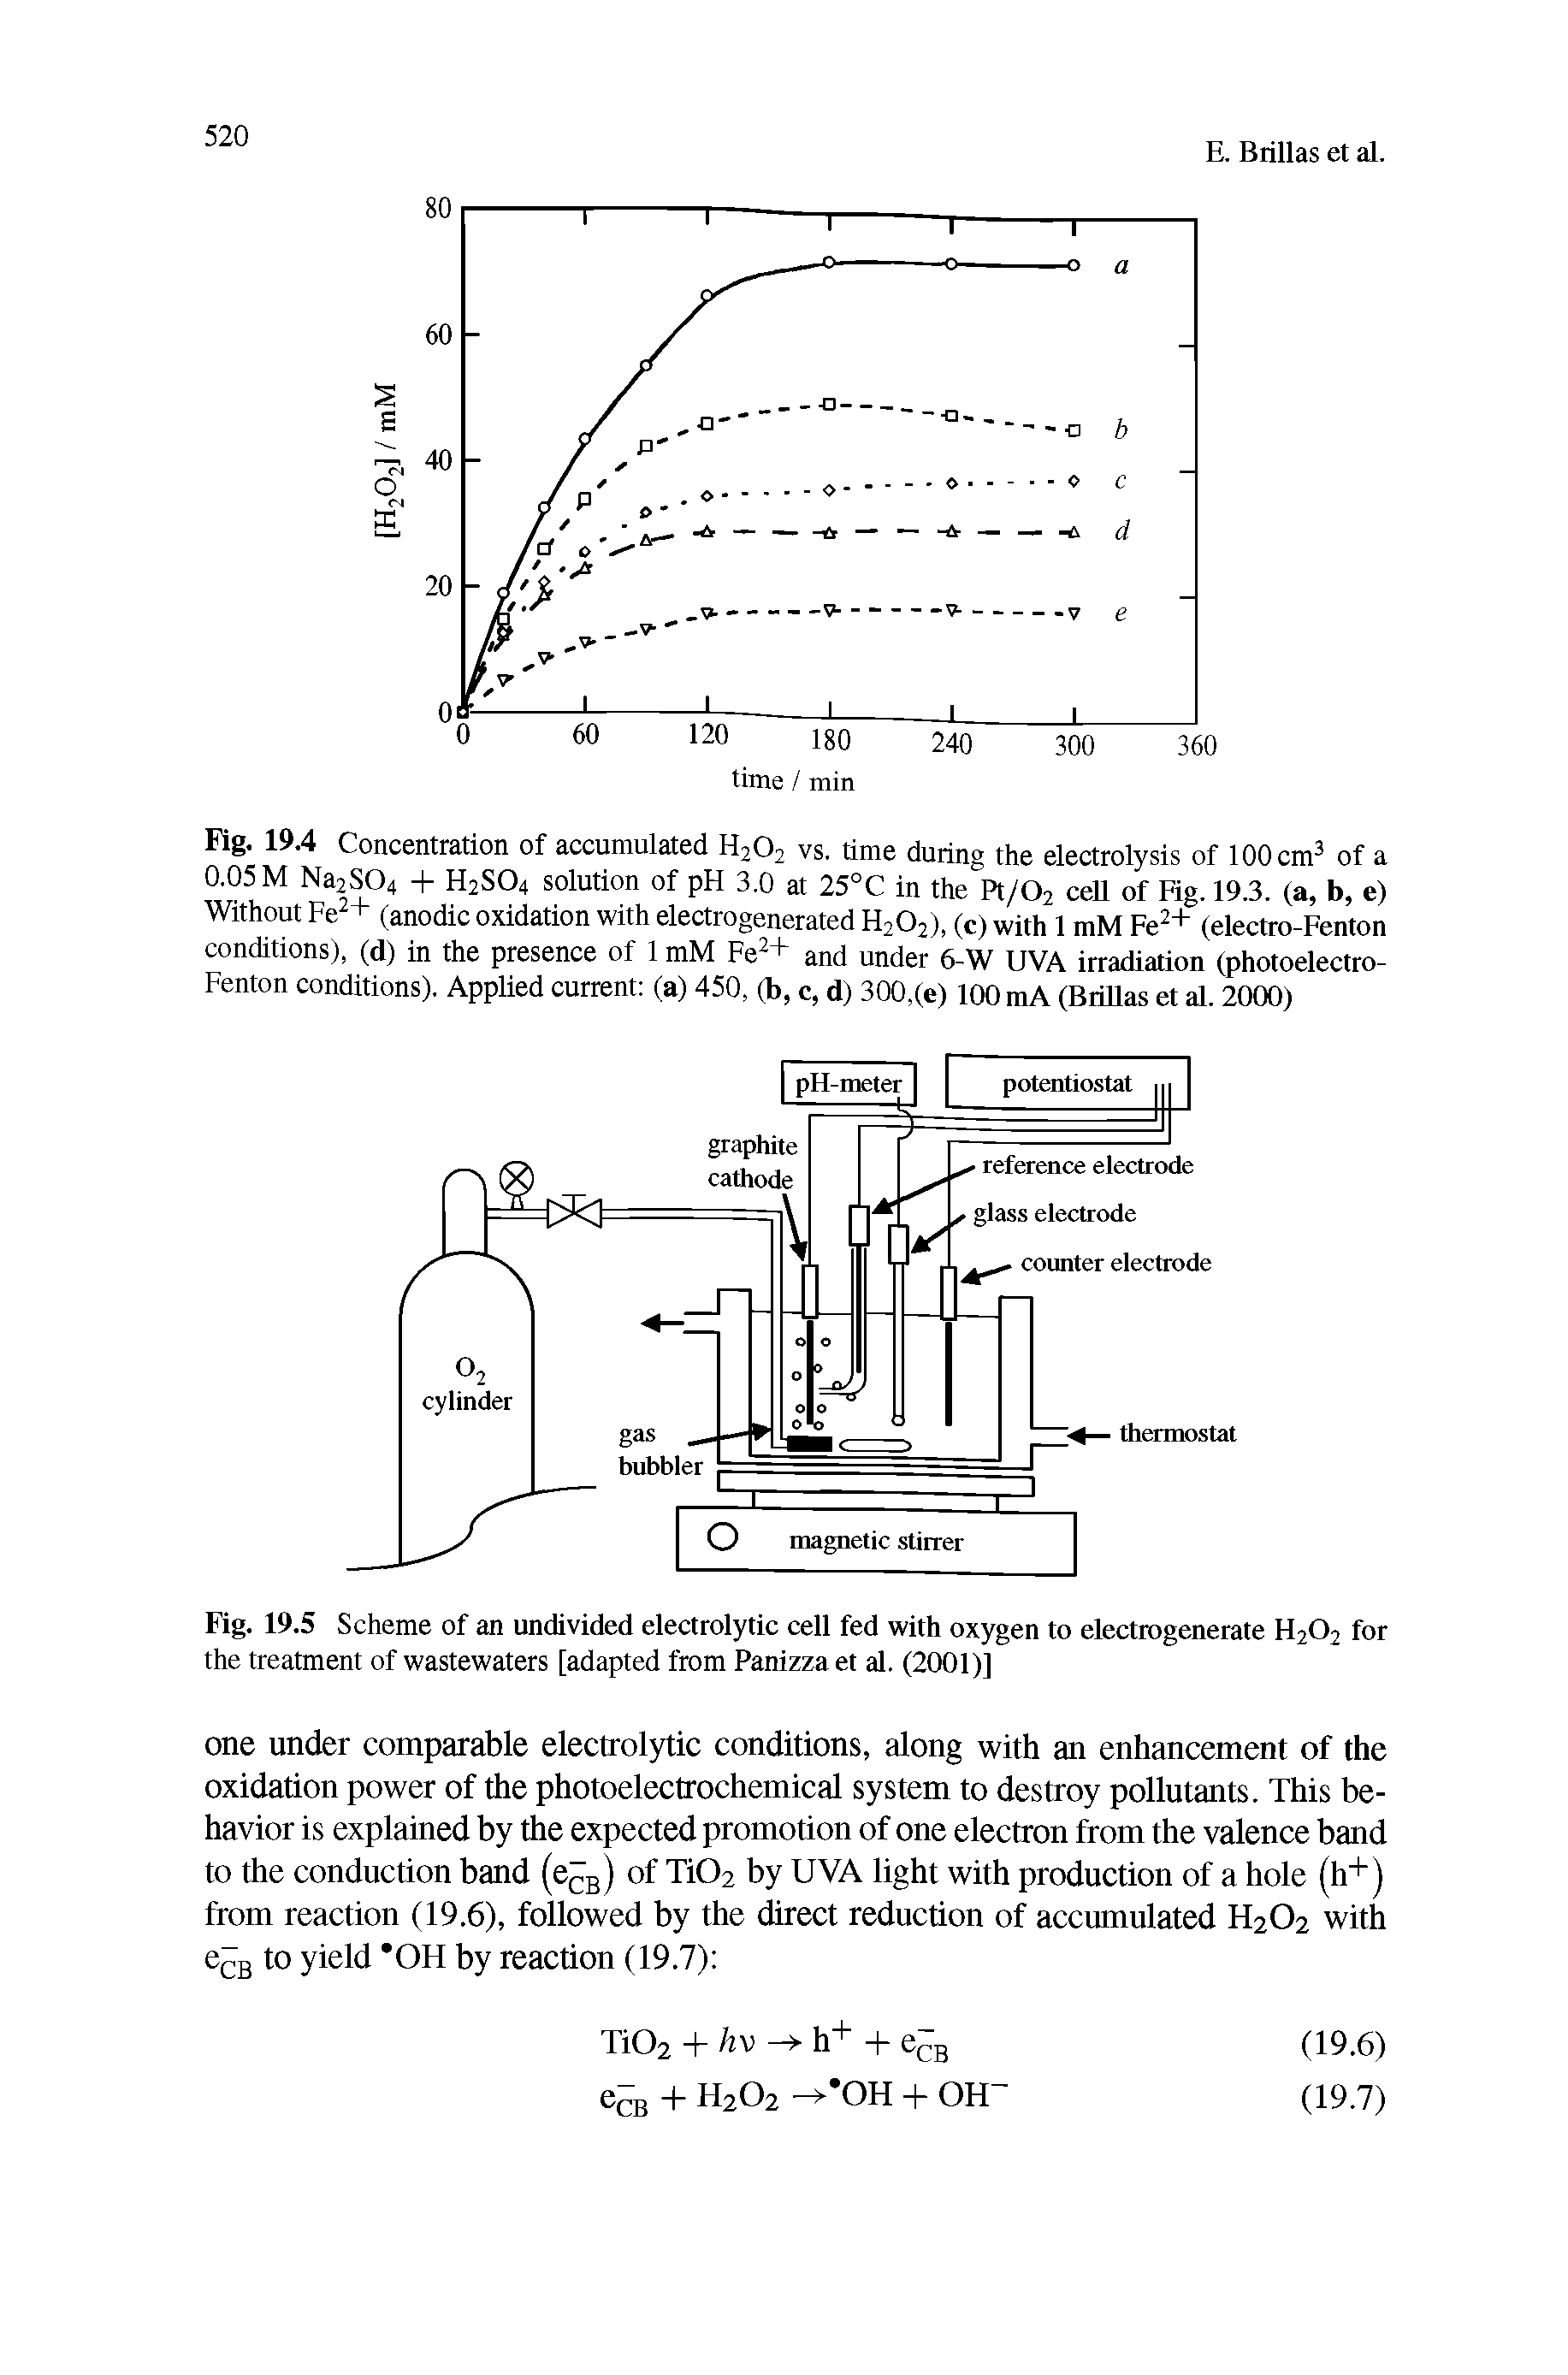 Fig. 19.4 Concentration of accumulated H202 vs. time during the electrolysis of 100 cm3 of a 0.05 M Na2S04 + H2S04 solution of pH 3.0 at 25°C in the Pt/02 cell of Fig. 19.3. (a, b, e) Without Pe2+ (anodic oxidation with electrogenerated H202), (c) with 1 mM Fe2+ (electro-Fenton conditions), (d) in the presence of 1 mM Fe2+ and under 6-W UVA irradiation (photoelectro-Fenton conditions). Applied current (a) 450, (b, c, d) 300,(e) 100 mA (Brillas et al. 2000)...